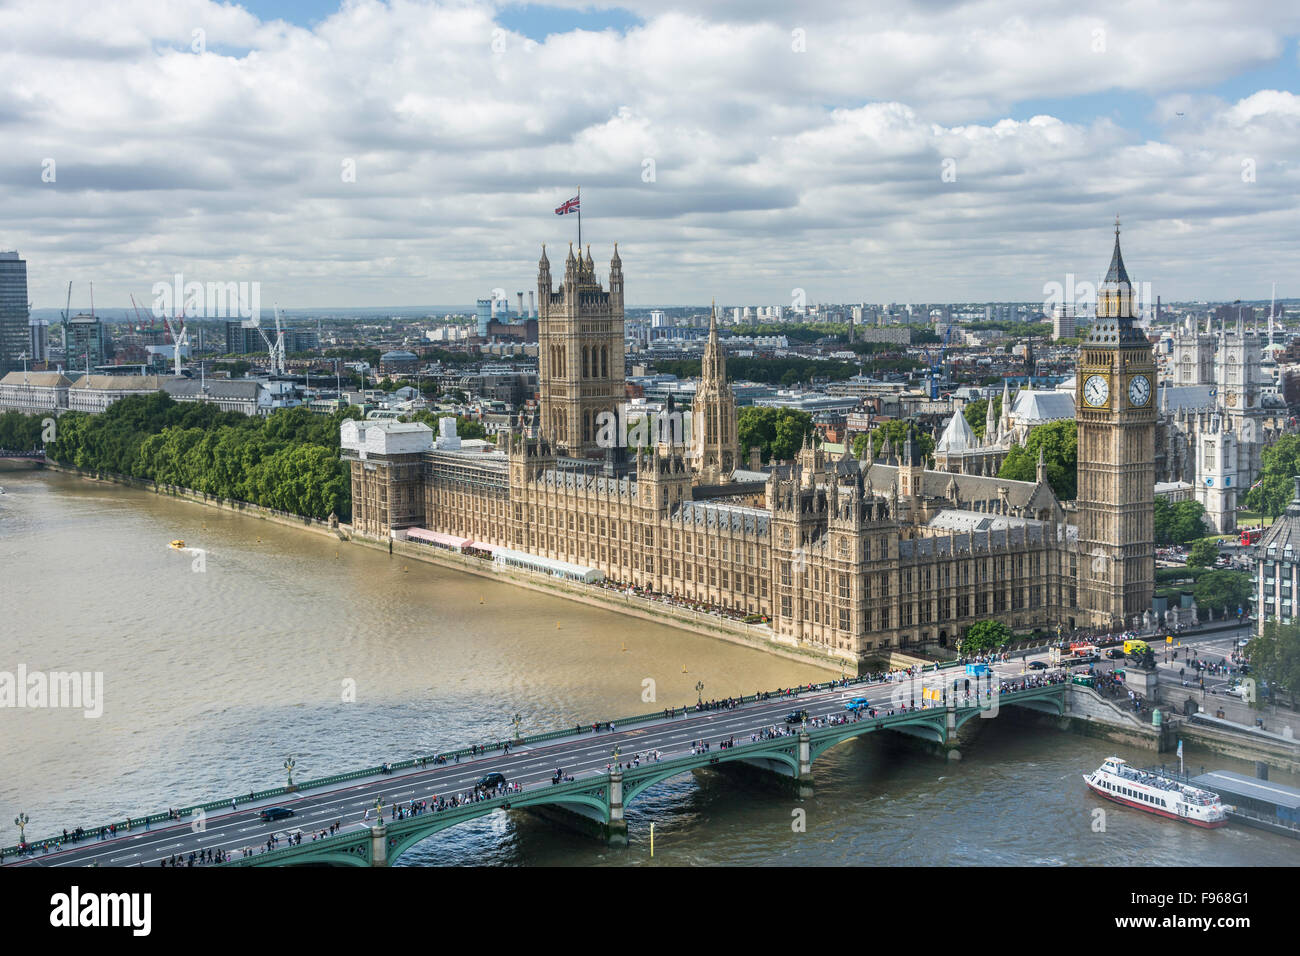 A view of Big Ben and House of Parliament in London, England, taken from a capsule of the London Eye panoramic wheel Stock Photo